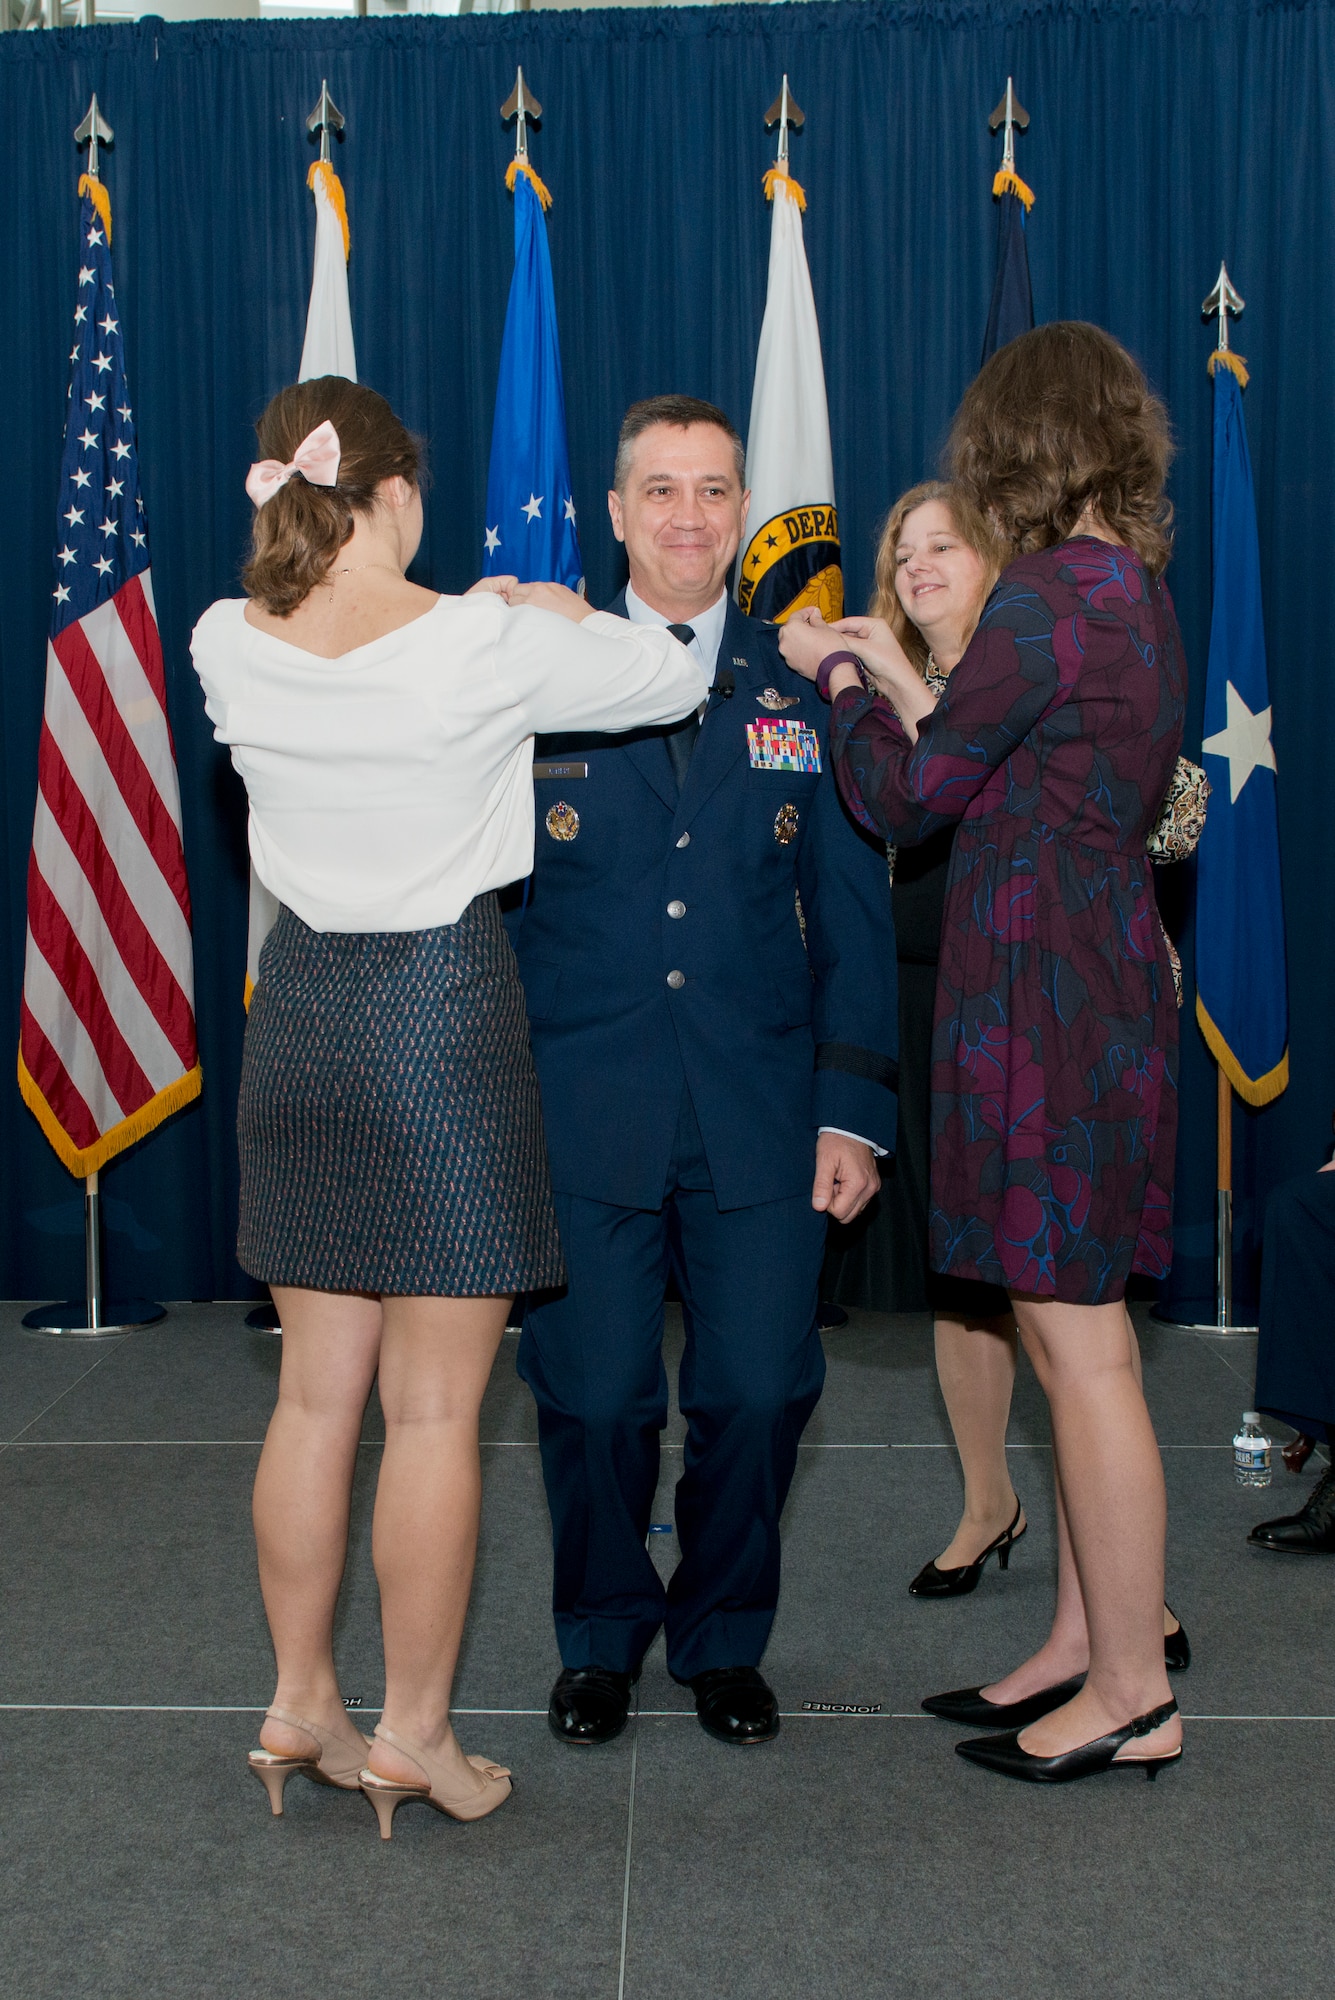 Air National Guard Readiness Center Commander Maj. Gen. Michael R. Taheri, is pinned with his second star during a promotion ceremony January 2, 2017, at Joint Base Andrews, Maryland. Taheri, who has commanded the Readiness Center for the past 18 months, was promoted to the rank of major general. (U.S. Air National Guard photo by Staff Sgt. John E. Hillier)